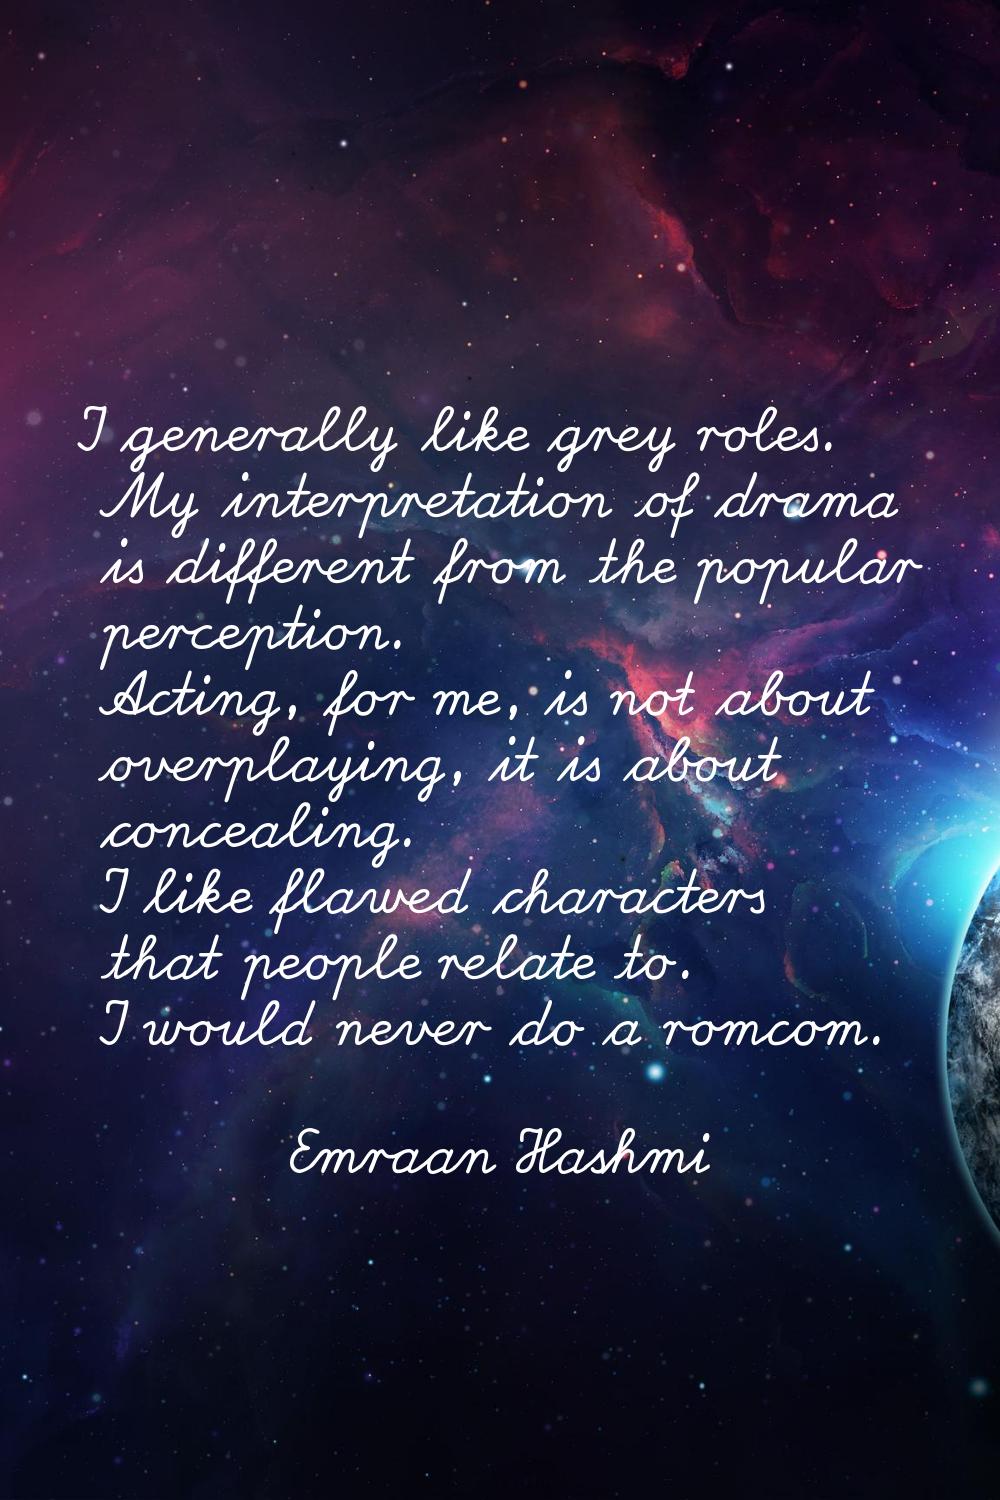 I generally like grey roles. My interpretation of drama is different from the popular perception. A